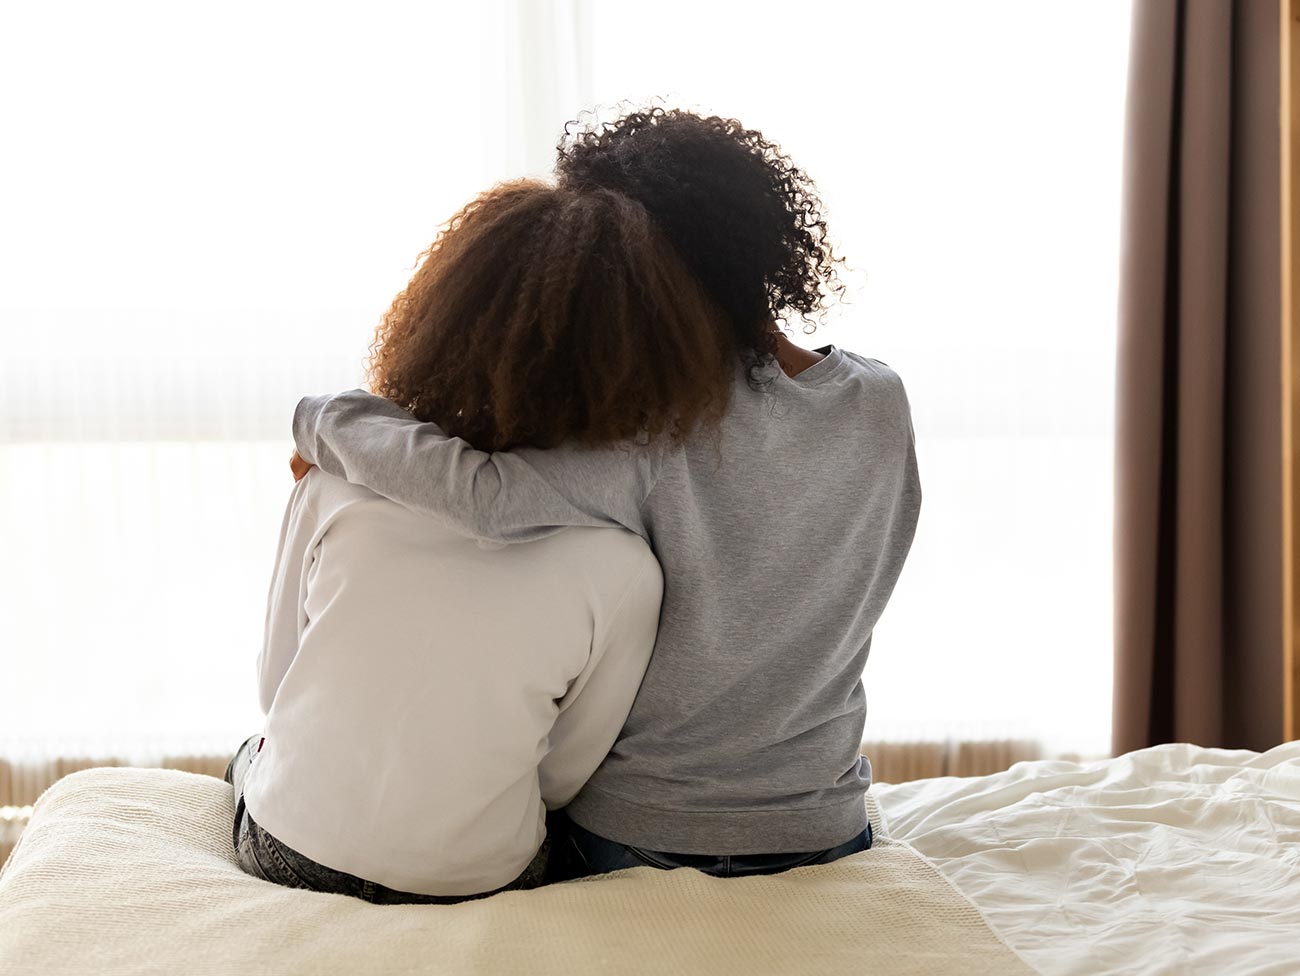 2 young people sitting on a bed with their arms around each other's shoulders